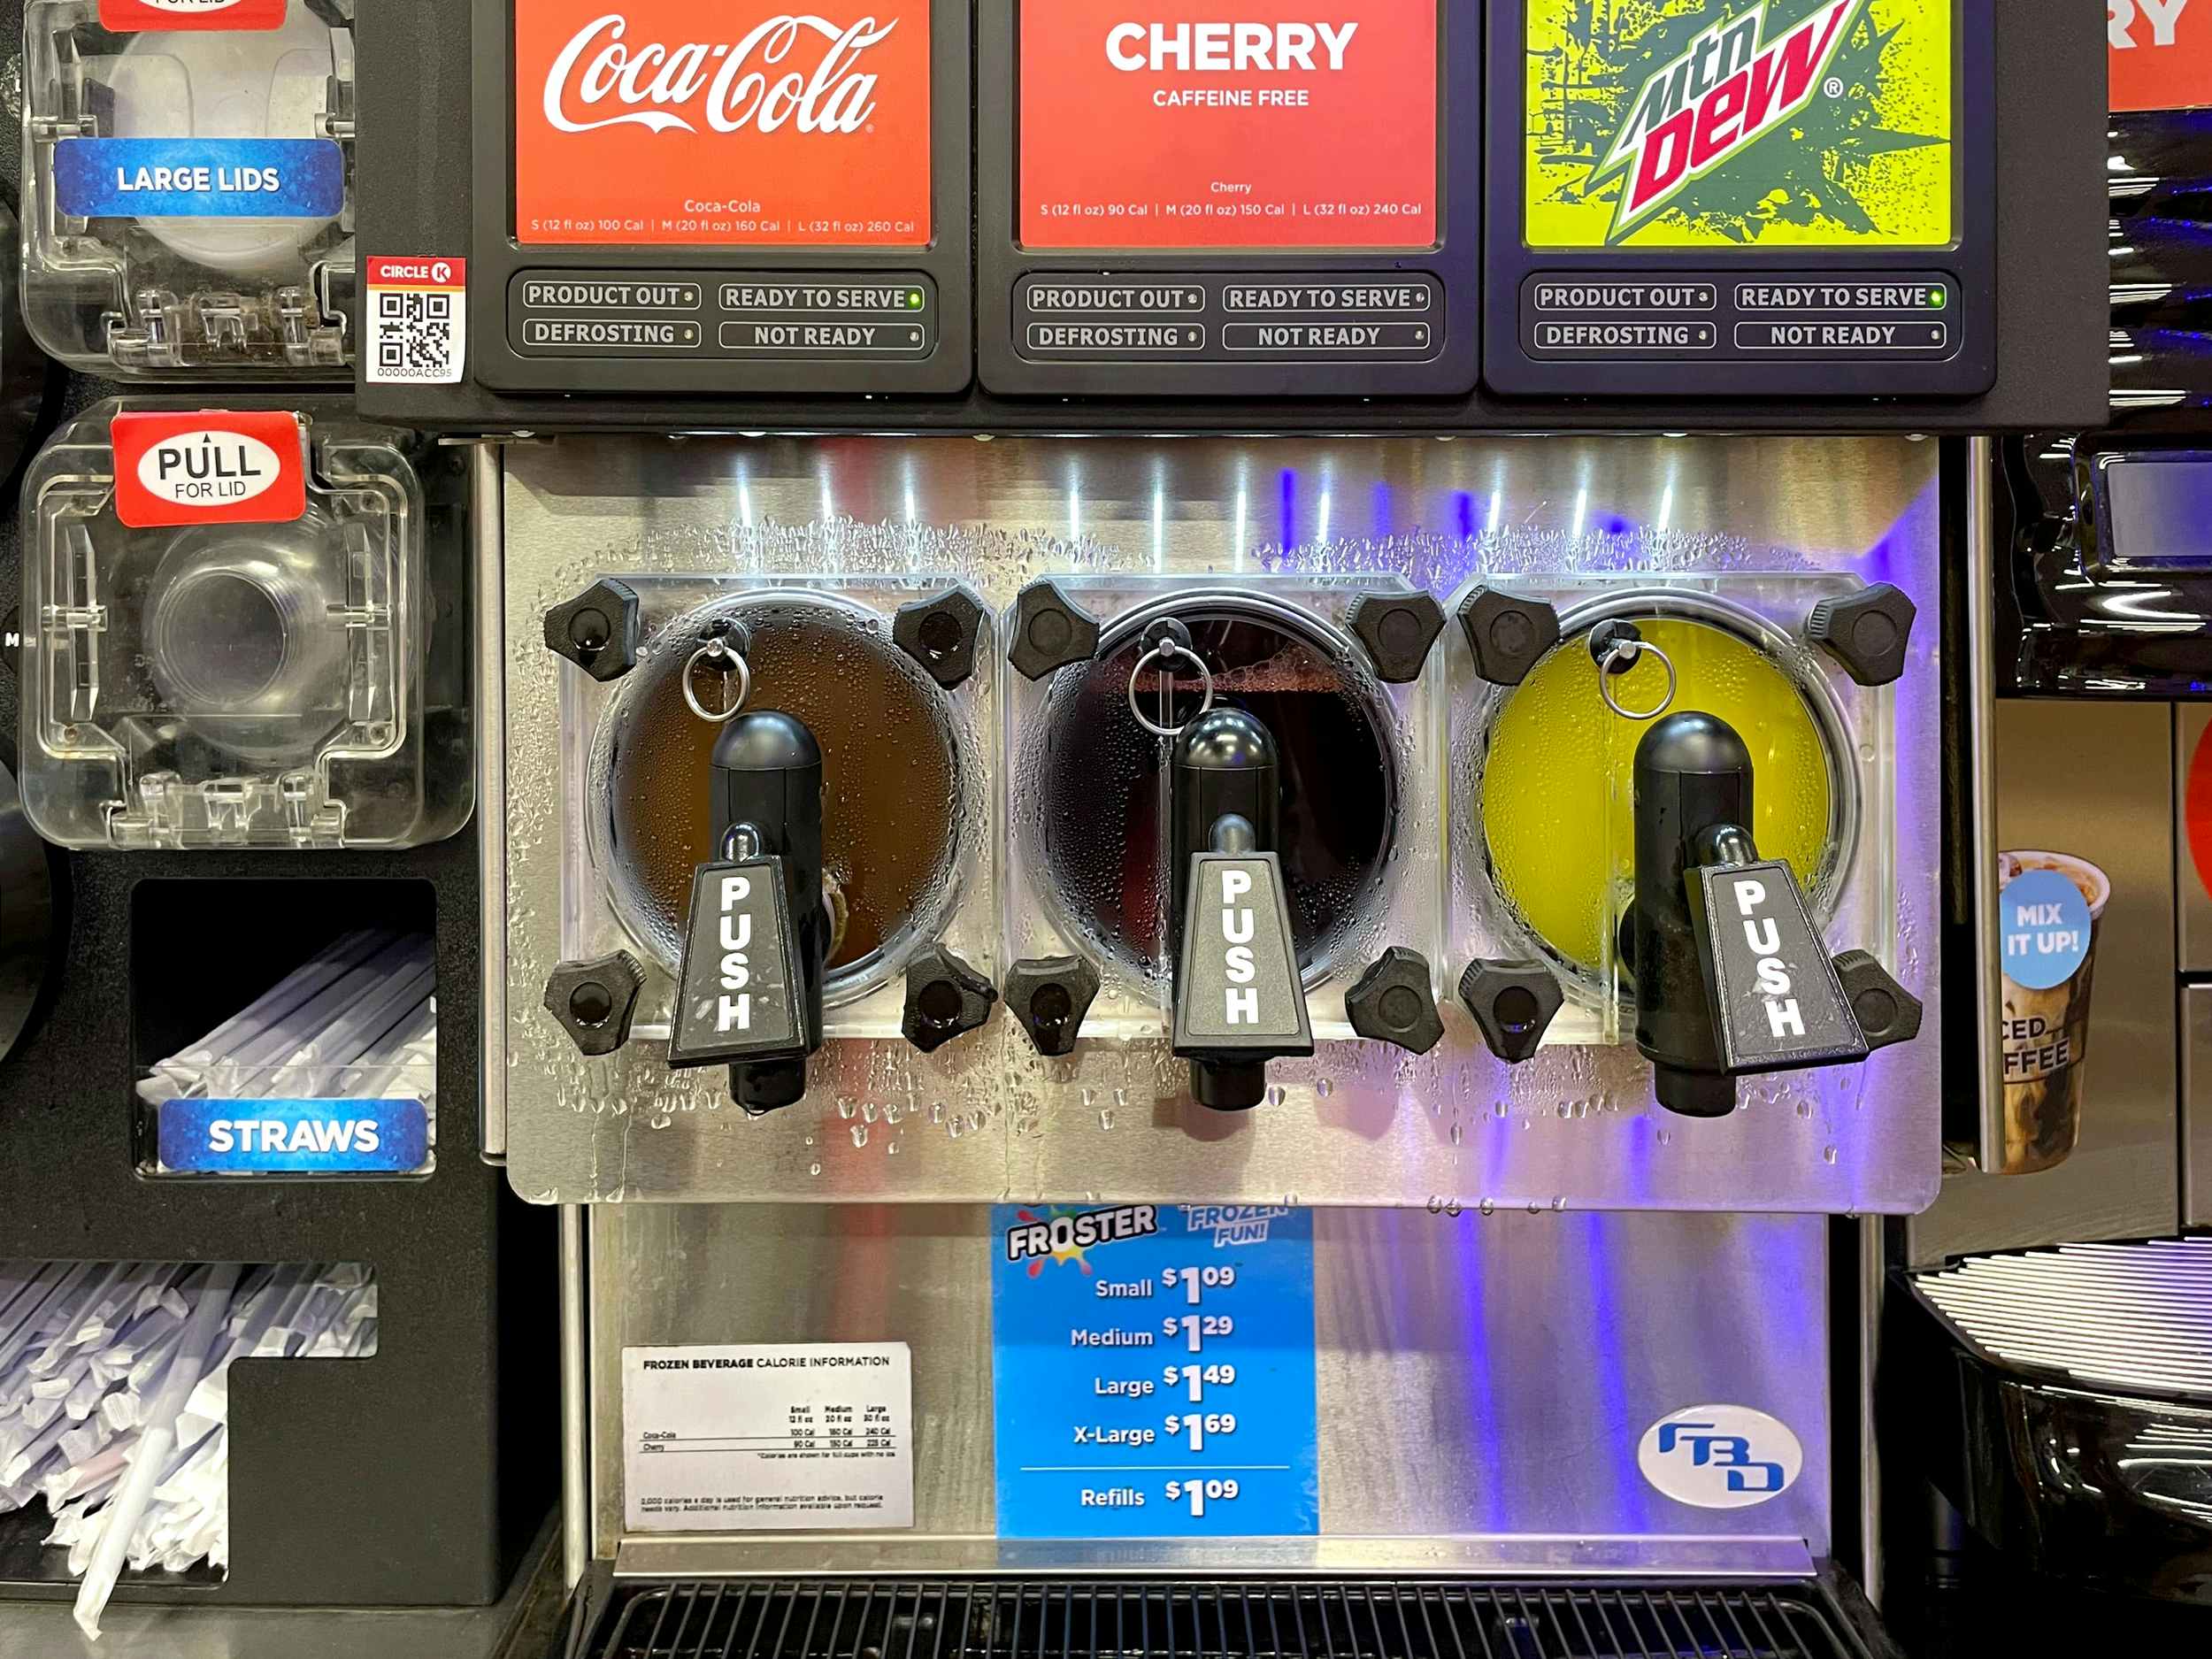 circle k froster machine with lids, straws, and prices